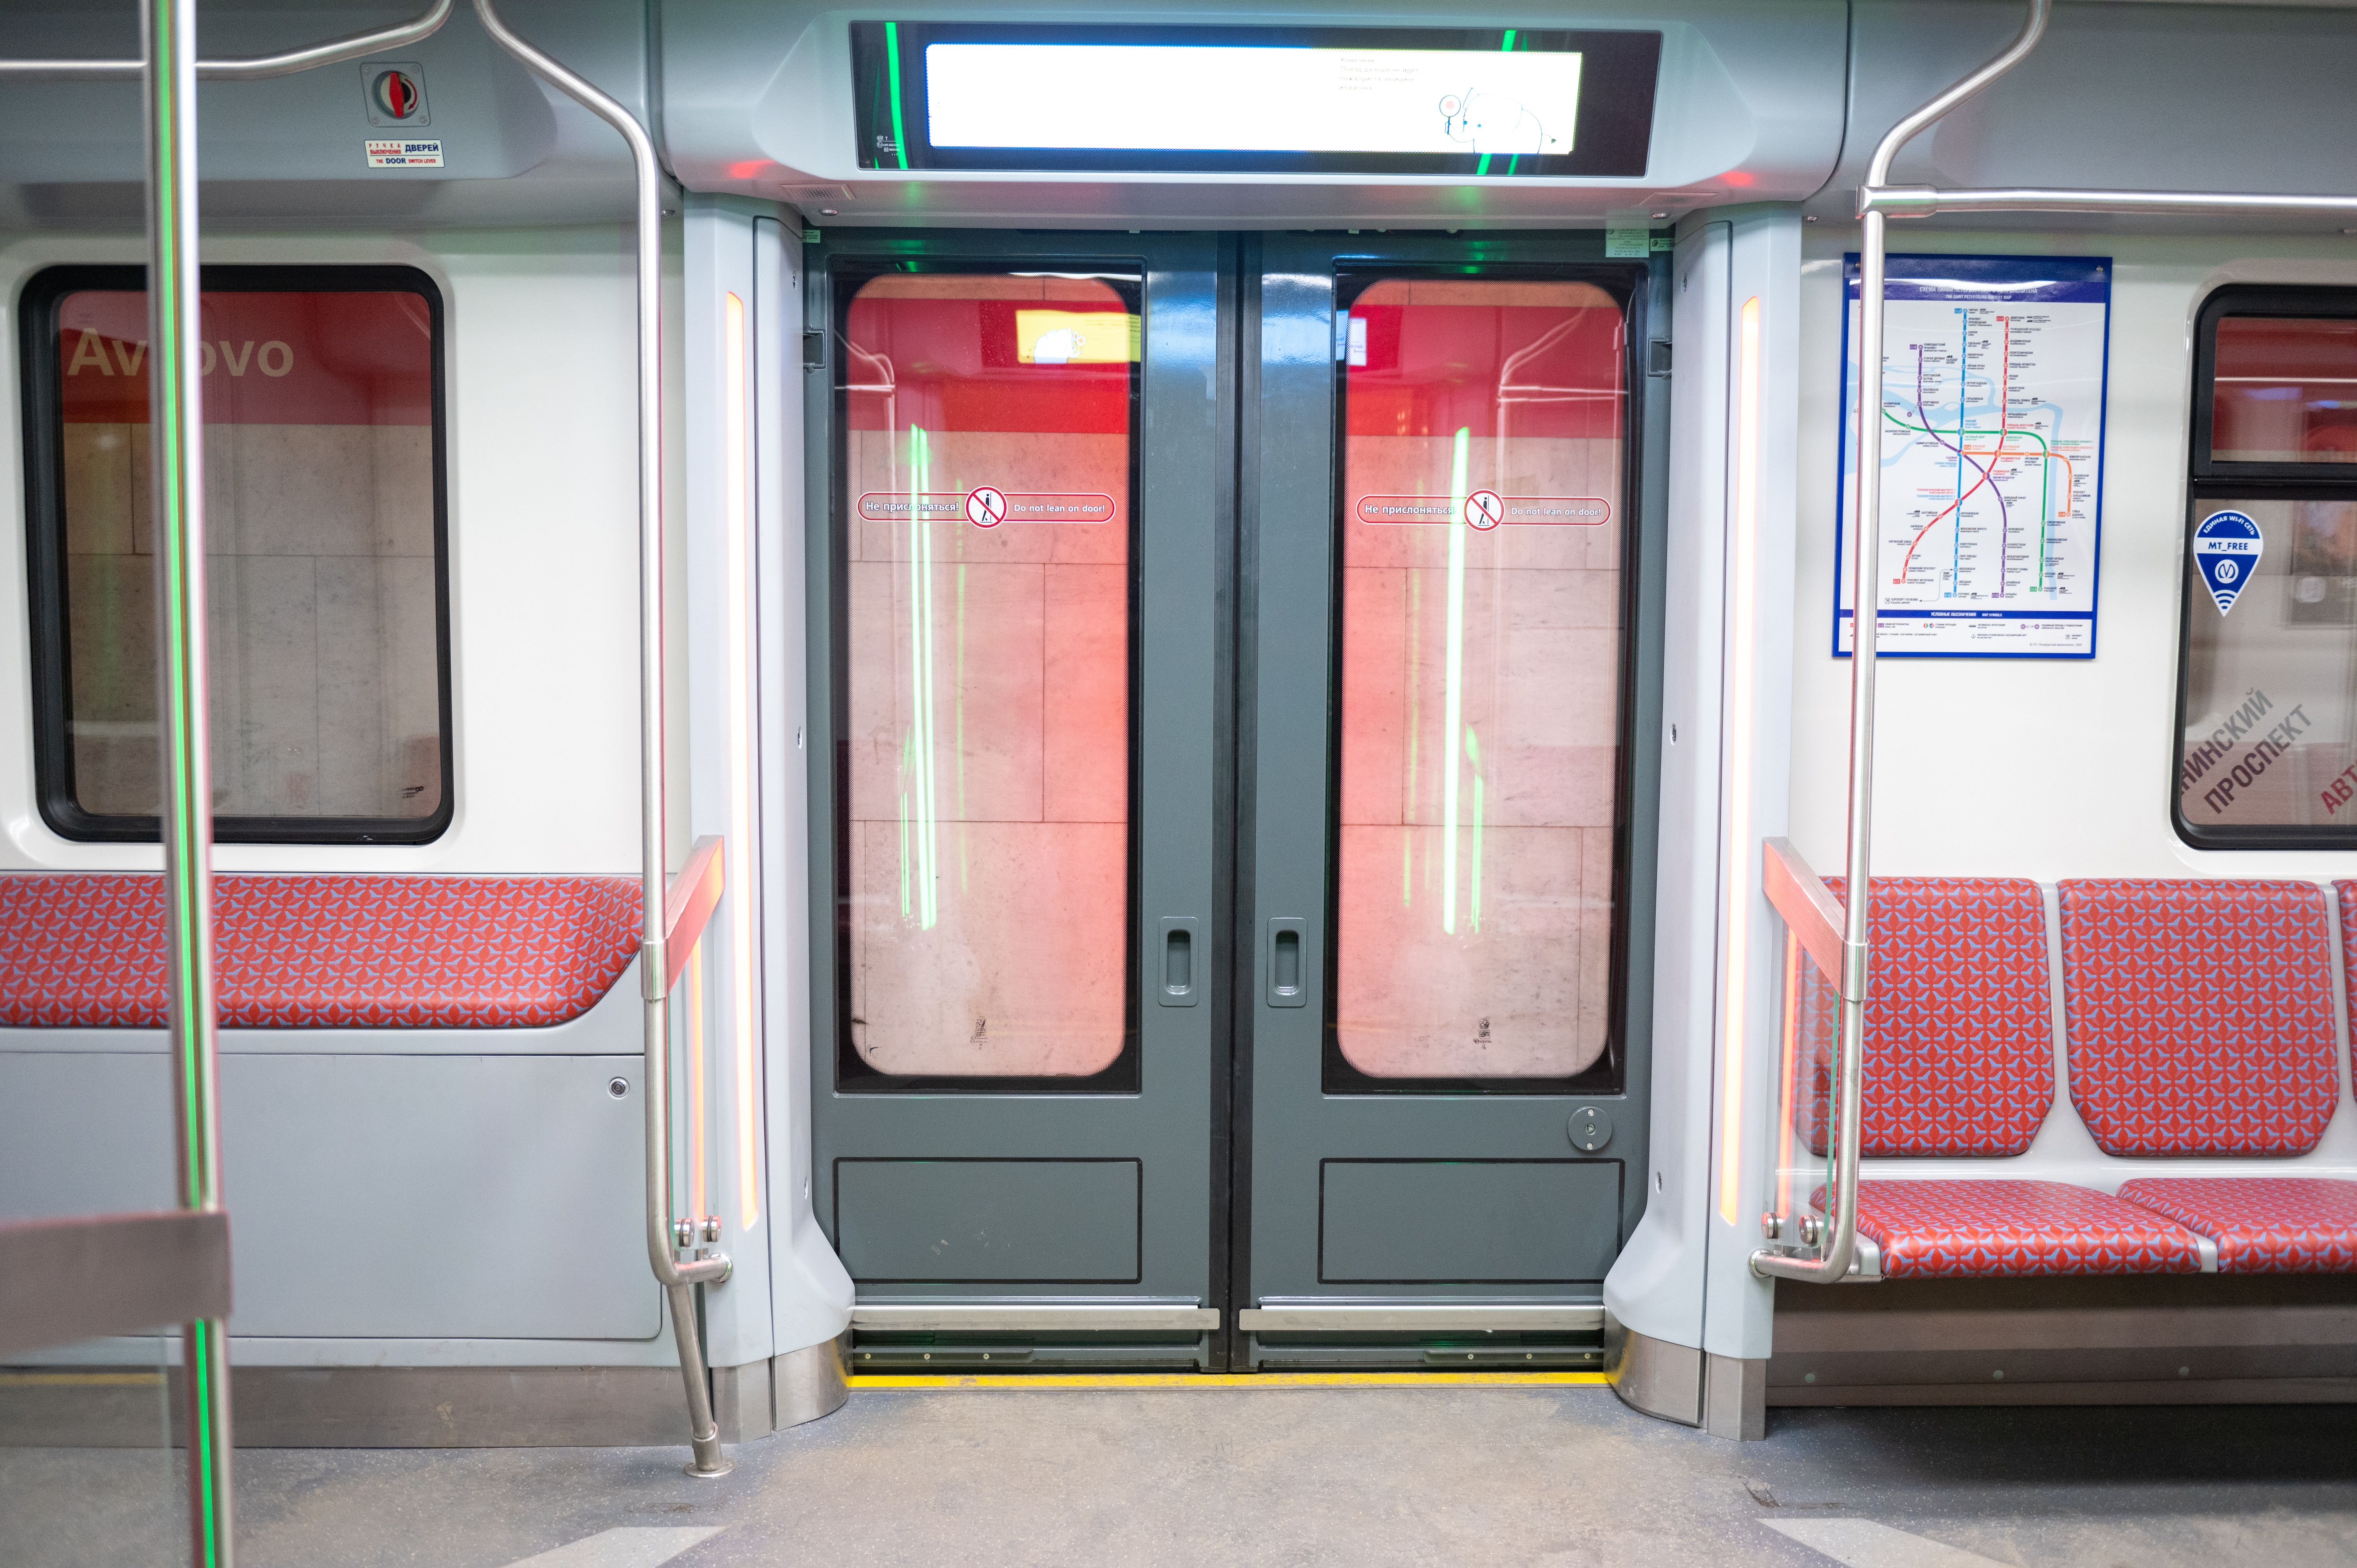 Sliding plug doors with LED lightning in Baltiets metro trains 81-725.1/726.1/727.1